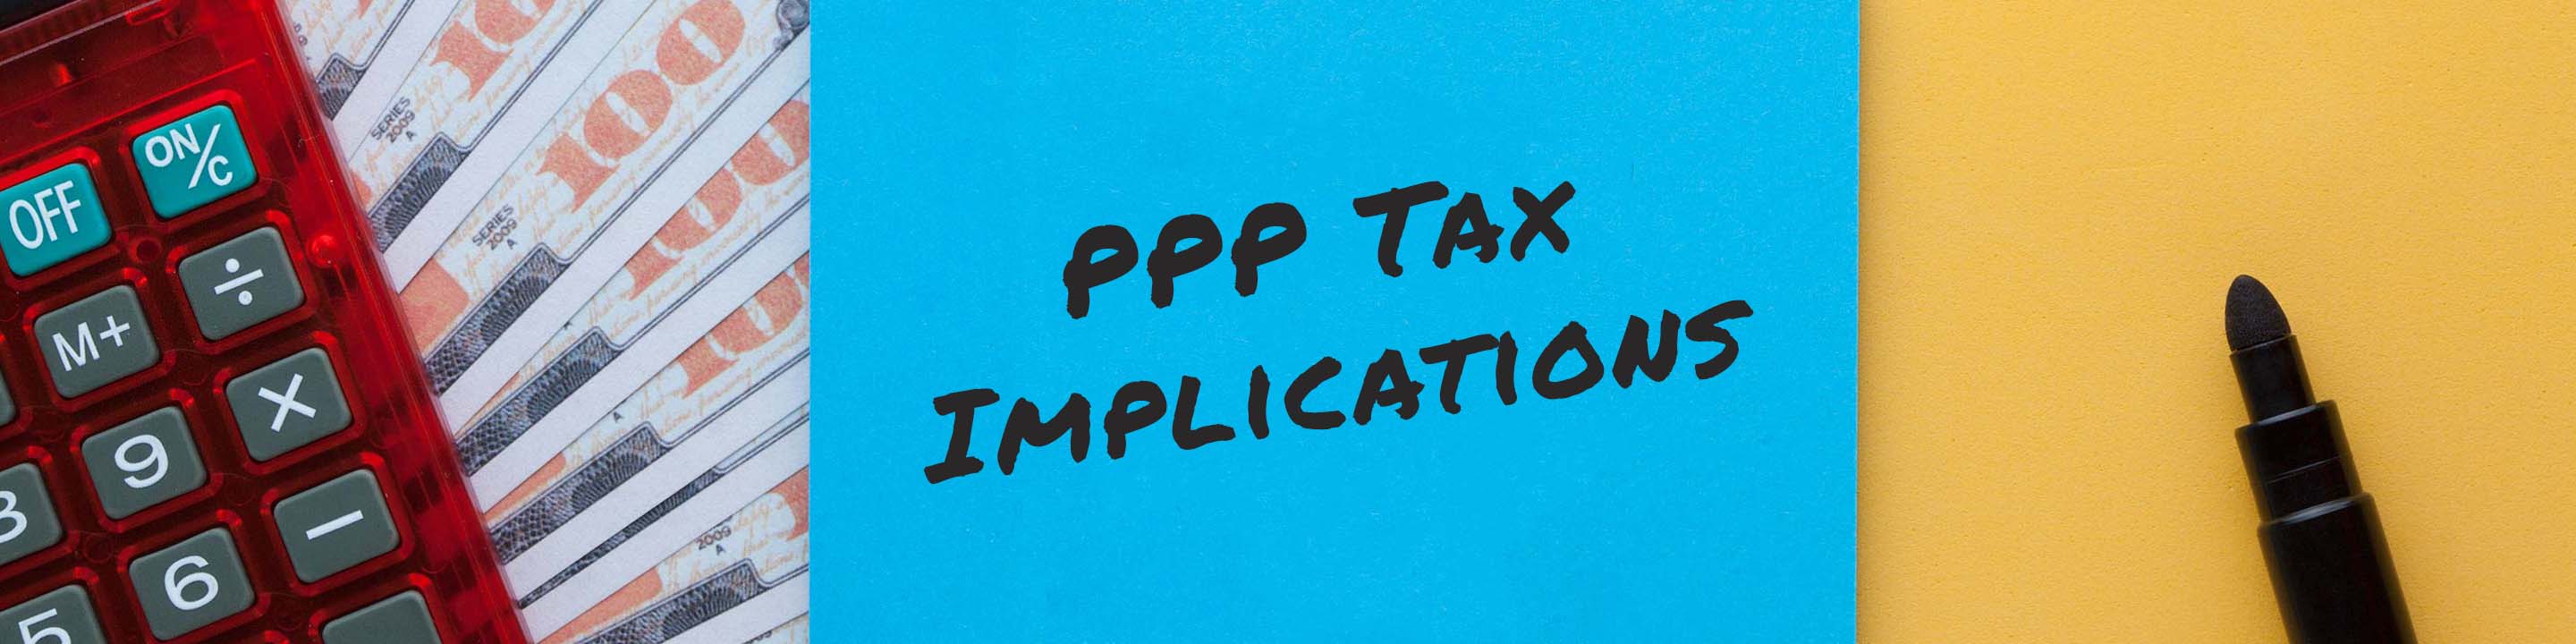 PPP Loan Federal & State Tax Implications